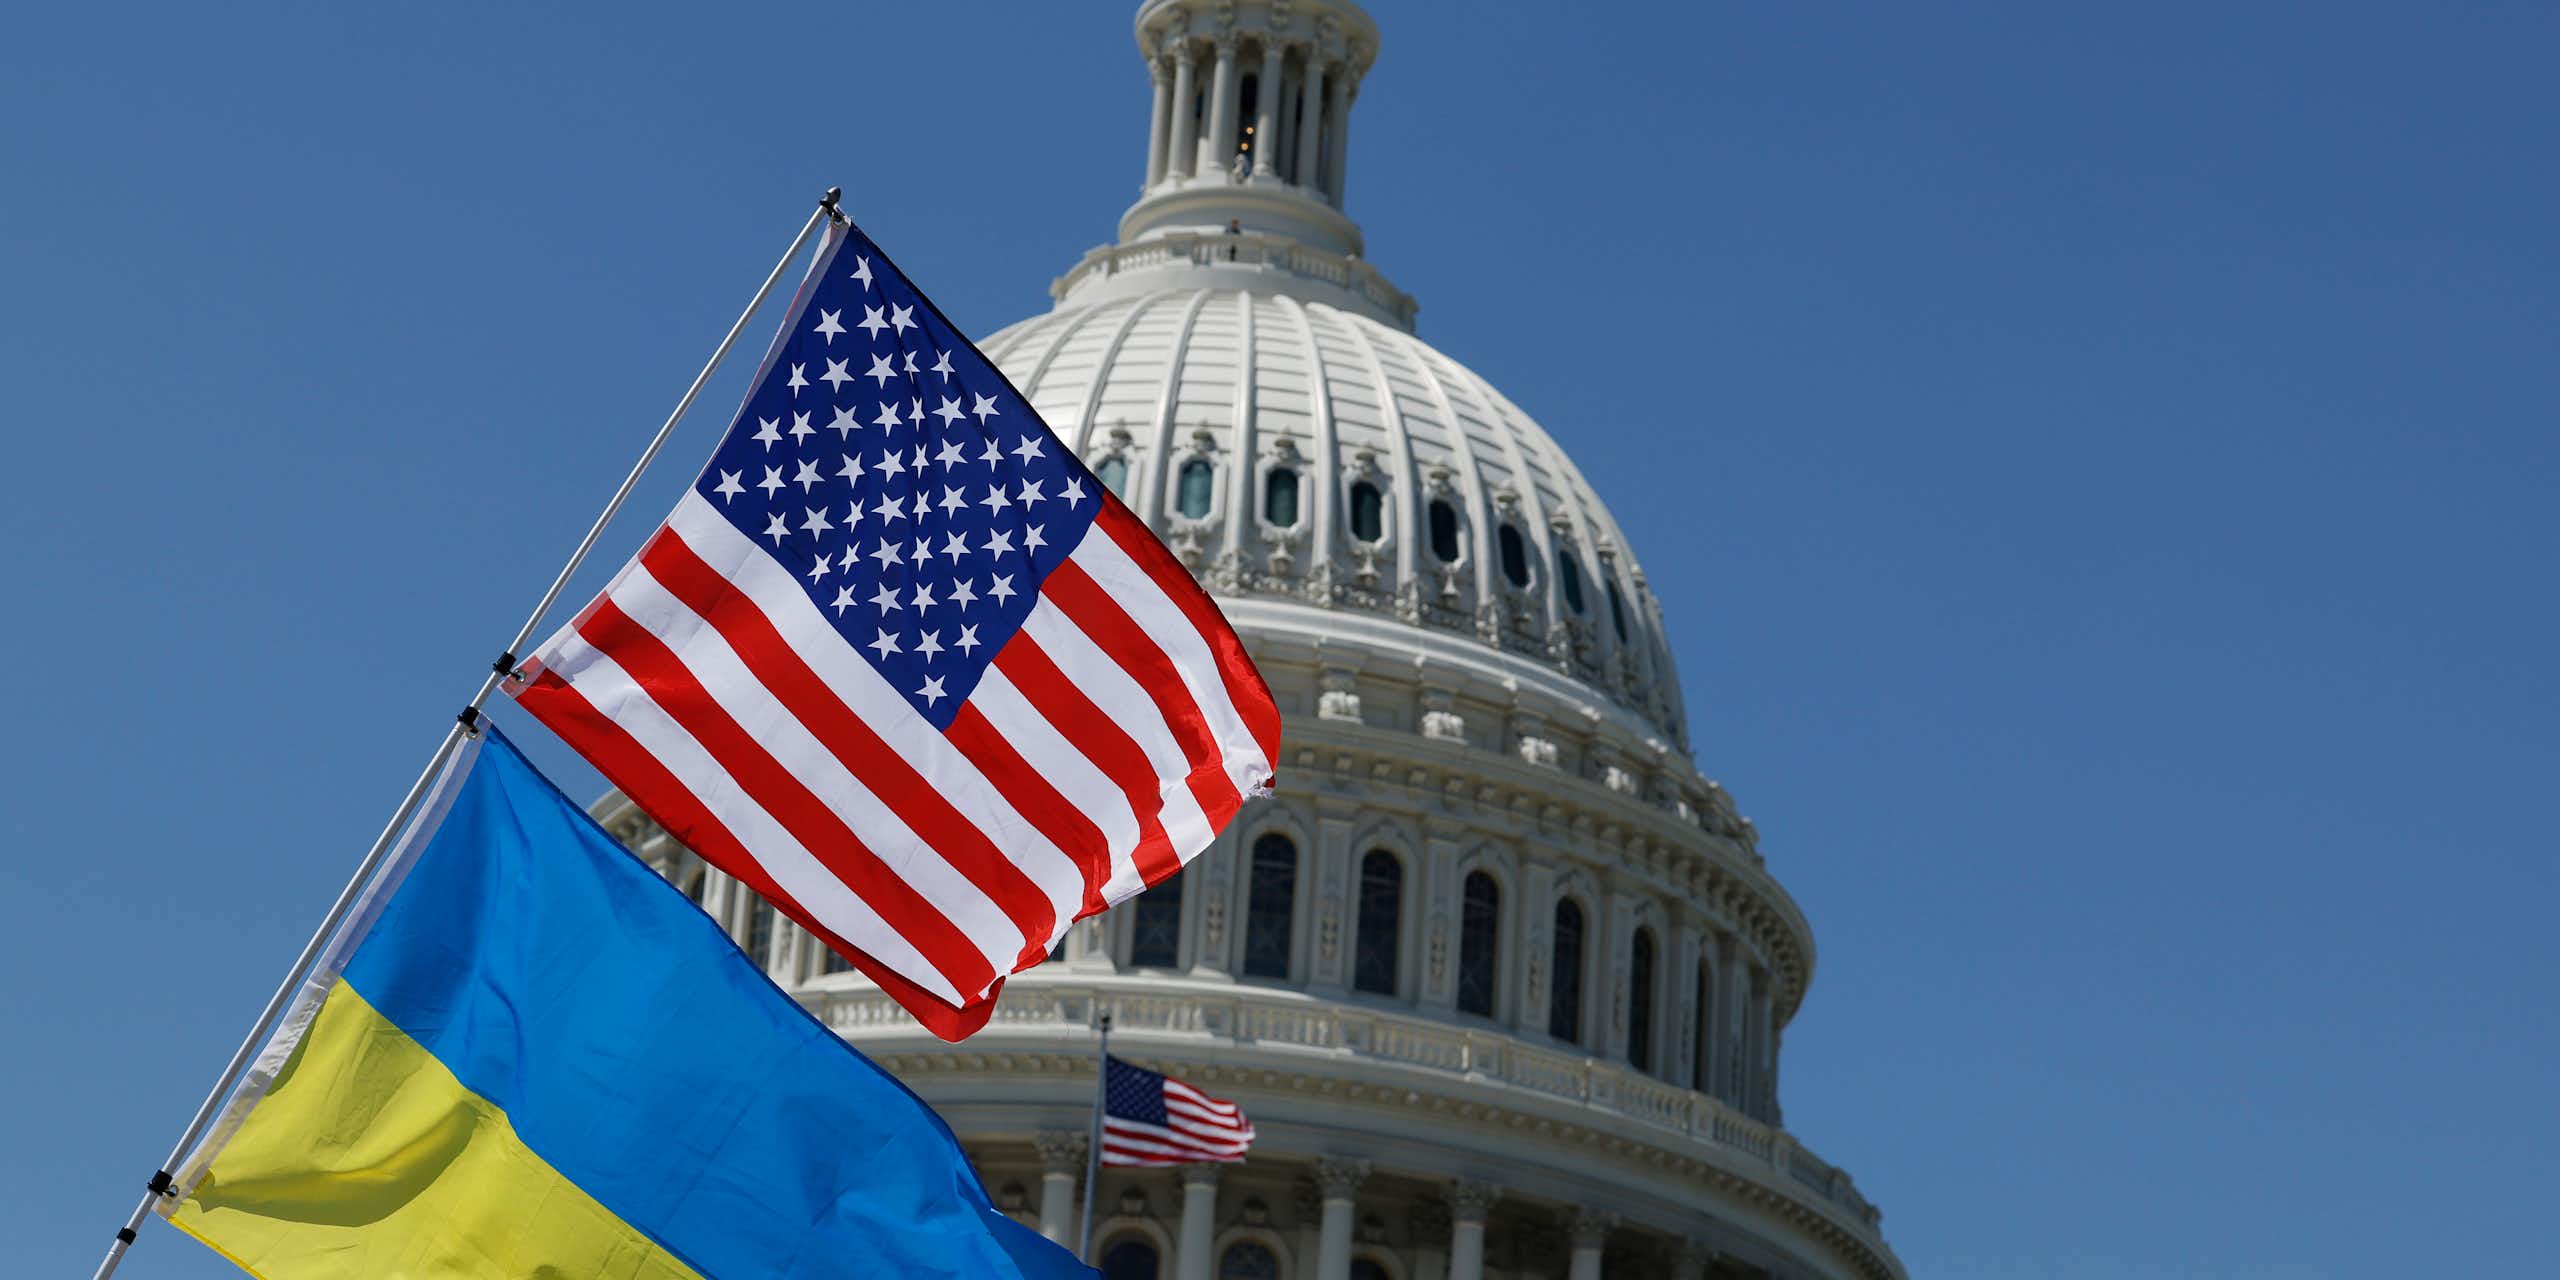 A blue and yellow flag rests on a poll below an American flag, in front of the top of the Capitol building dome. There is a bright blue sky behind the building.